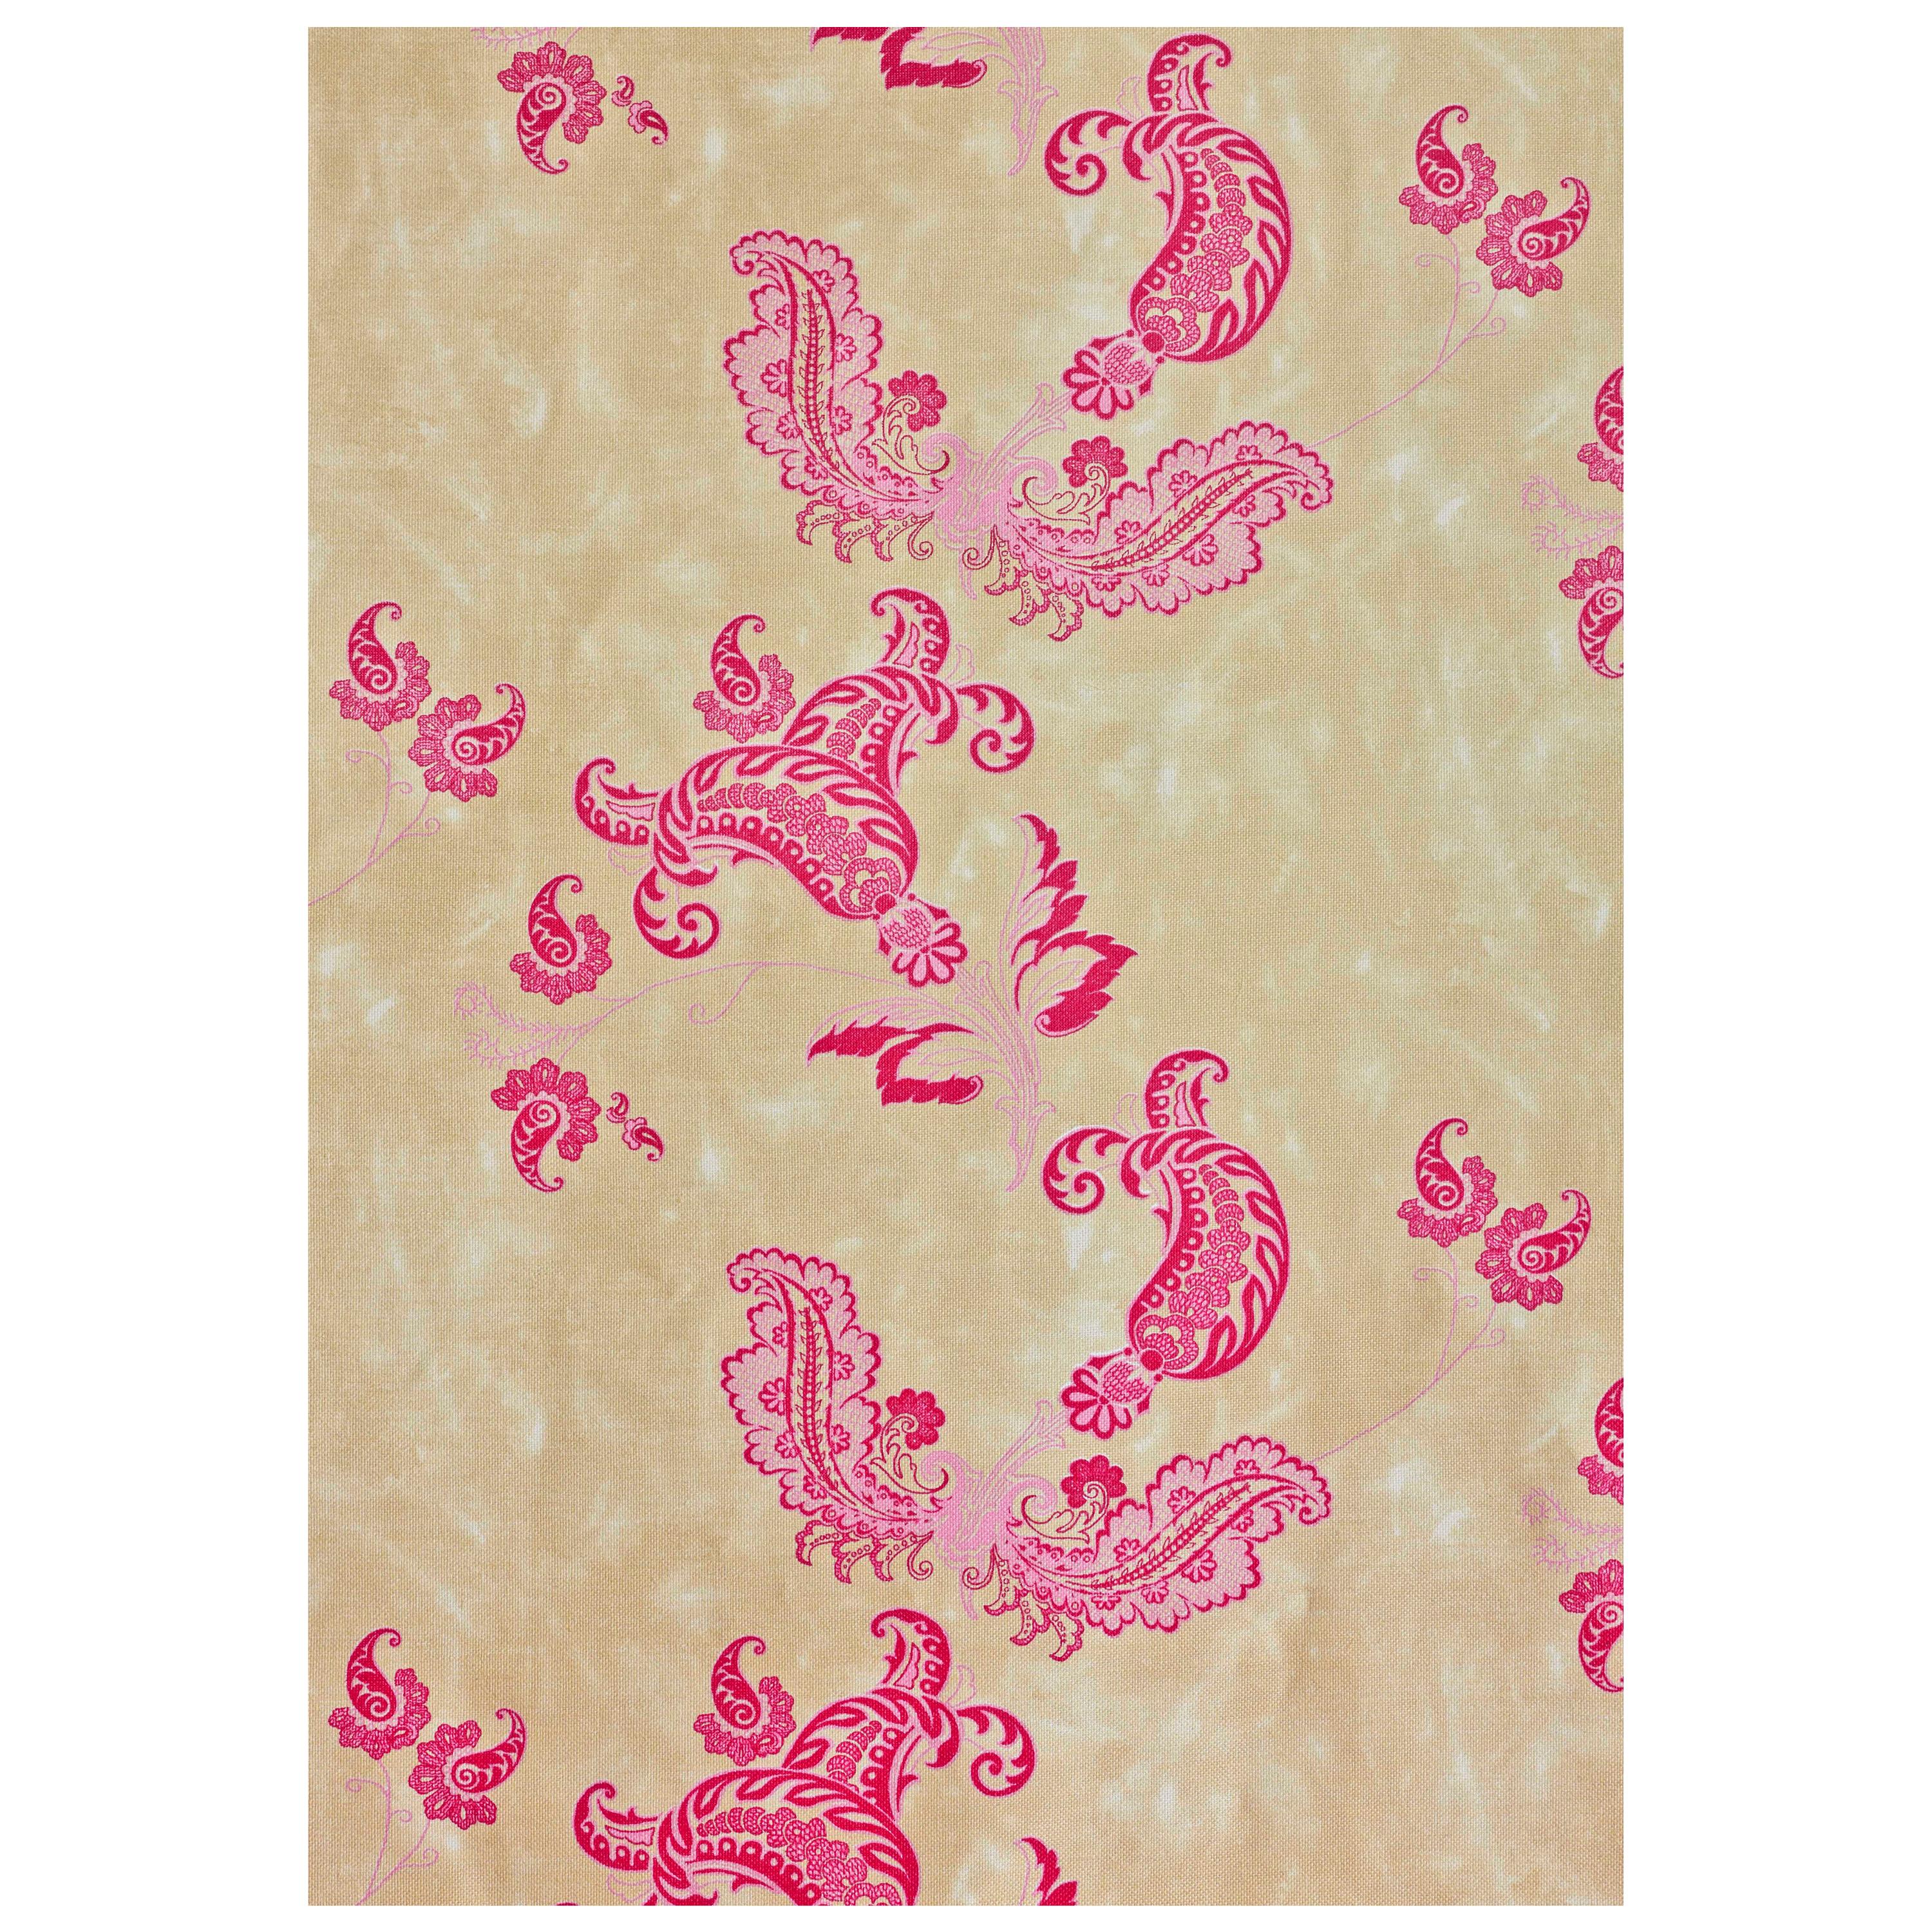 'Paisley' Contemporary, Traditional Fabric in Hot Pink on Tea Stain For Sale